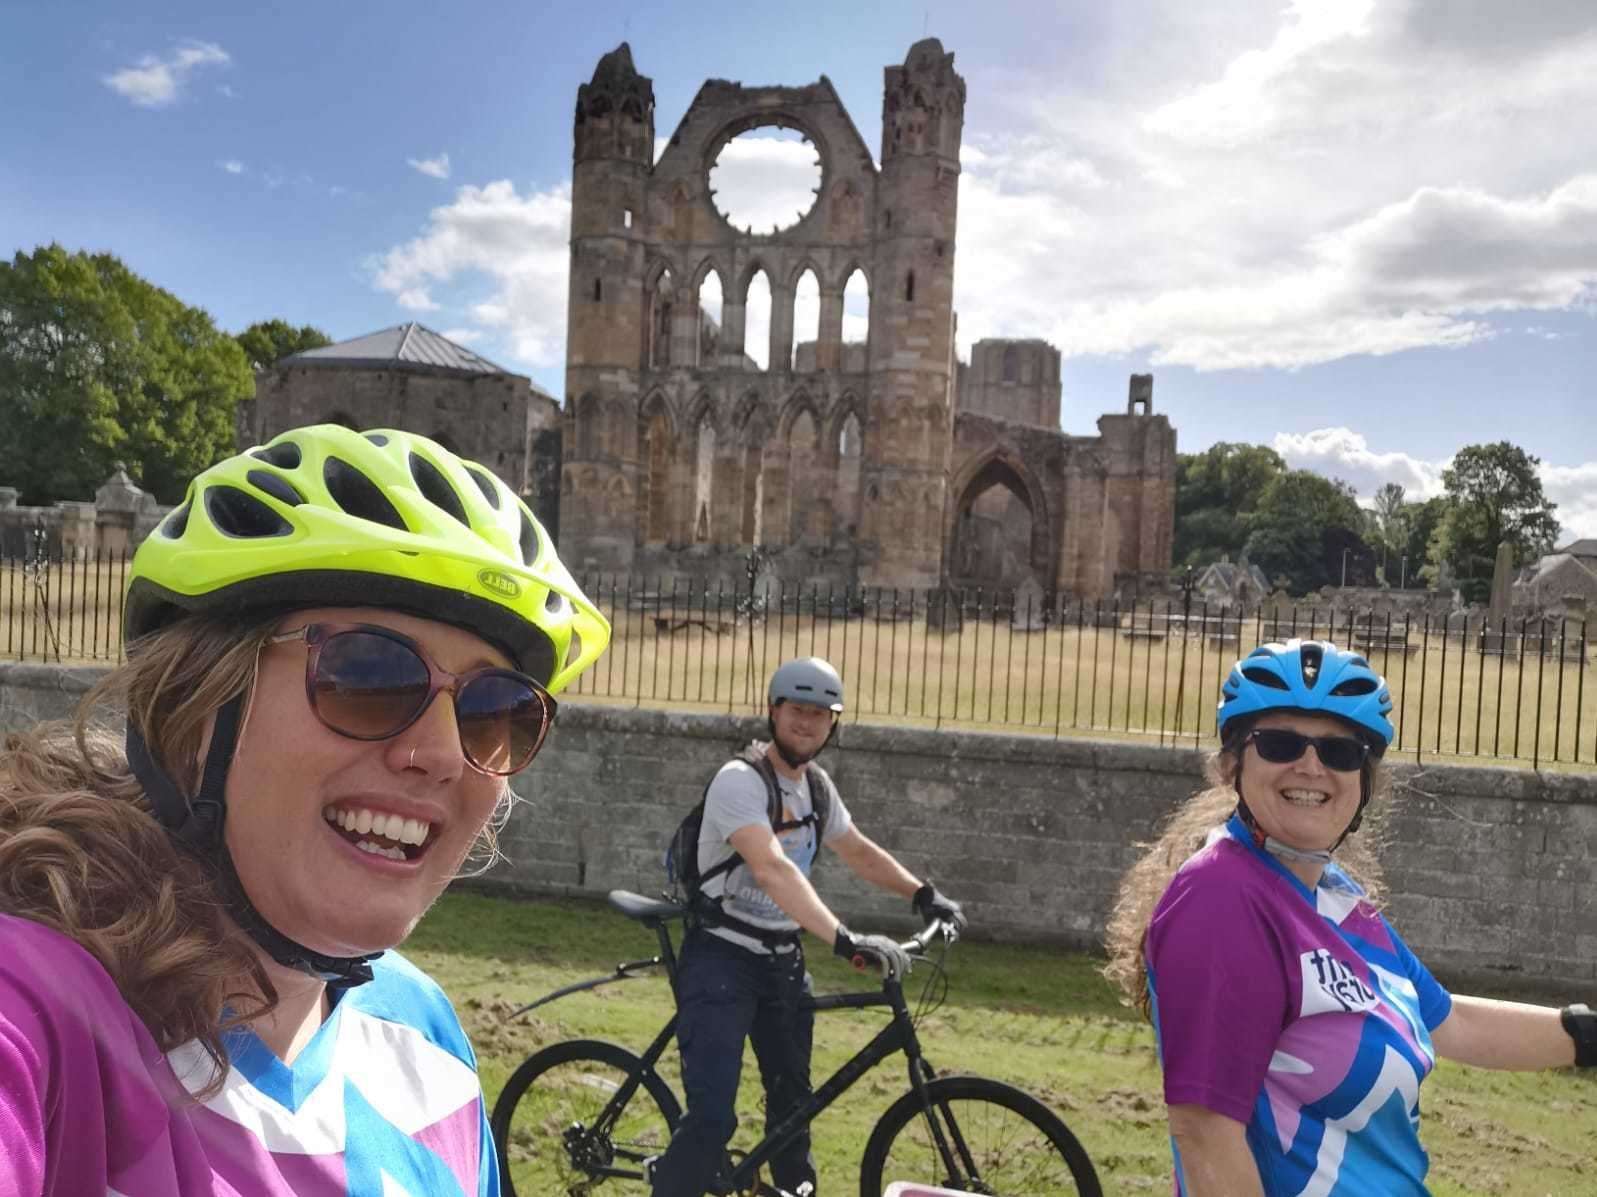 Outfit Moray staff (from left) Anna Vince, Andy Woolnough and Karen Cox, on their bikes outside Elgin Cathedral.